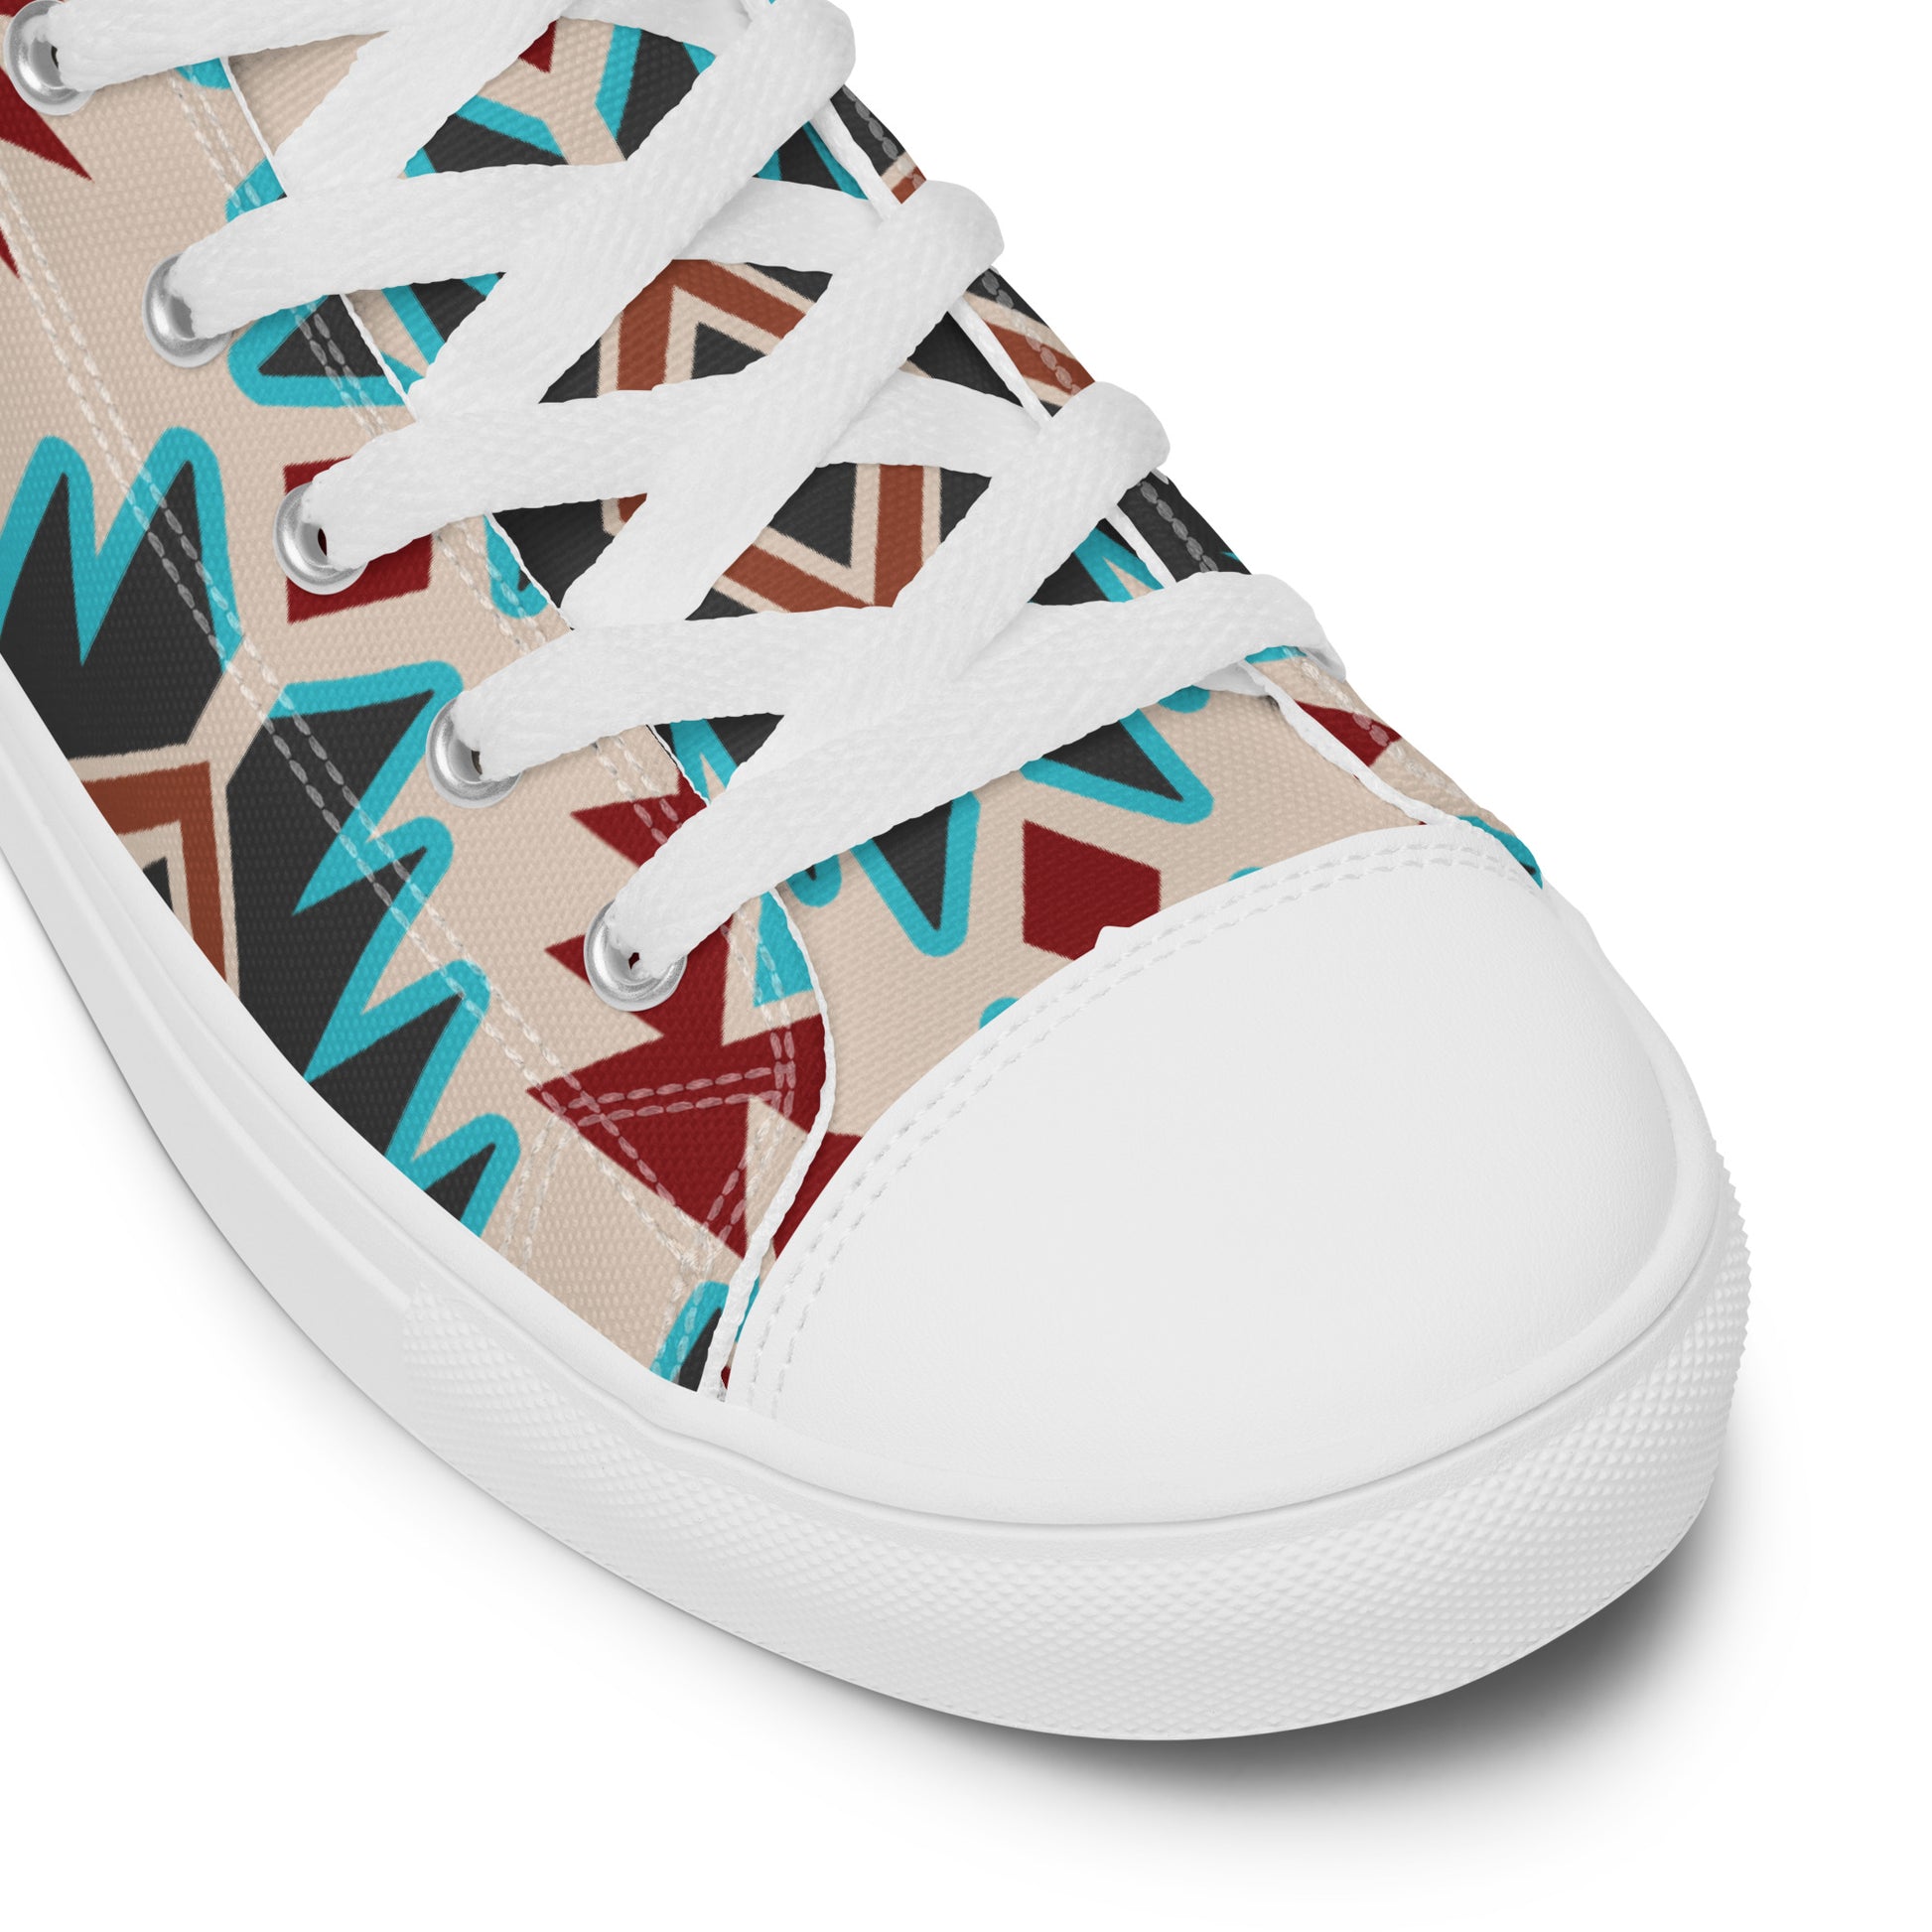 Red Aztec Bull Women’s high top canvas shoes - aztec, aztec print, bull, bull skull, canvas, high top shoes, high tops, red bull skull, shoes -  - Baha Ranch Western Wear